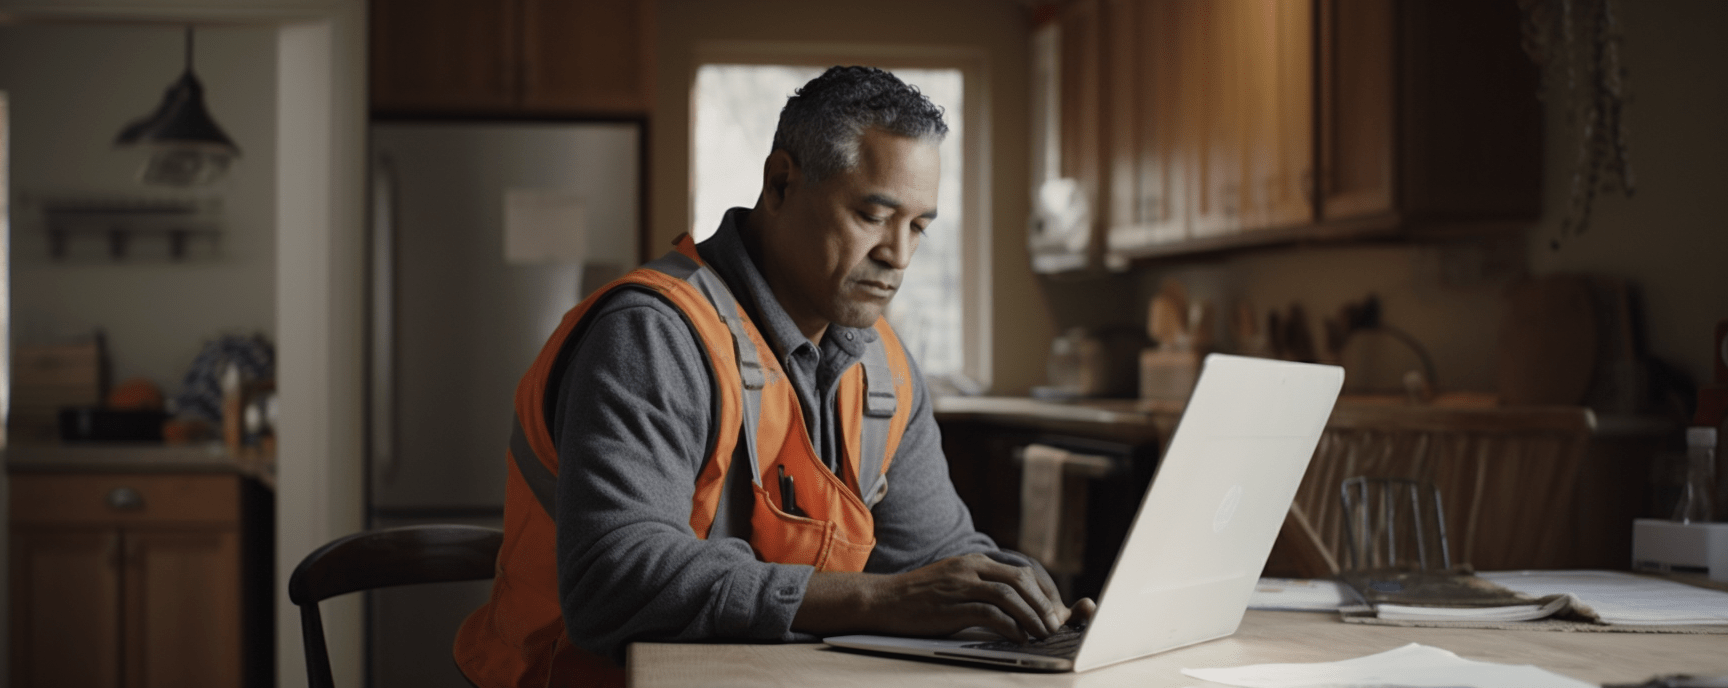 Construction worker anxiously checking computer for update on SSDI application